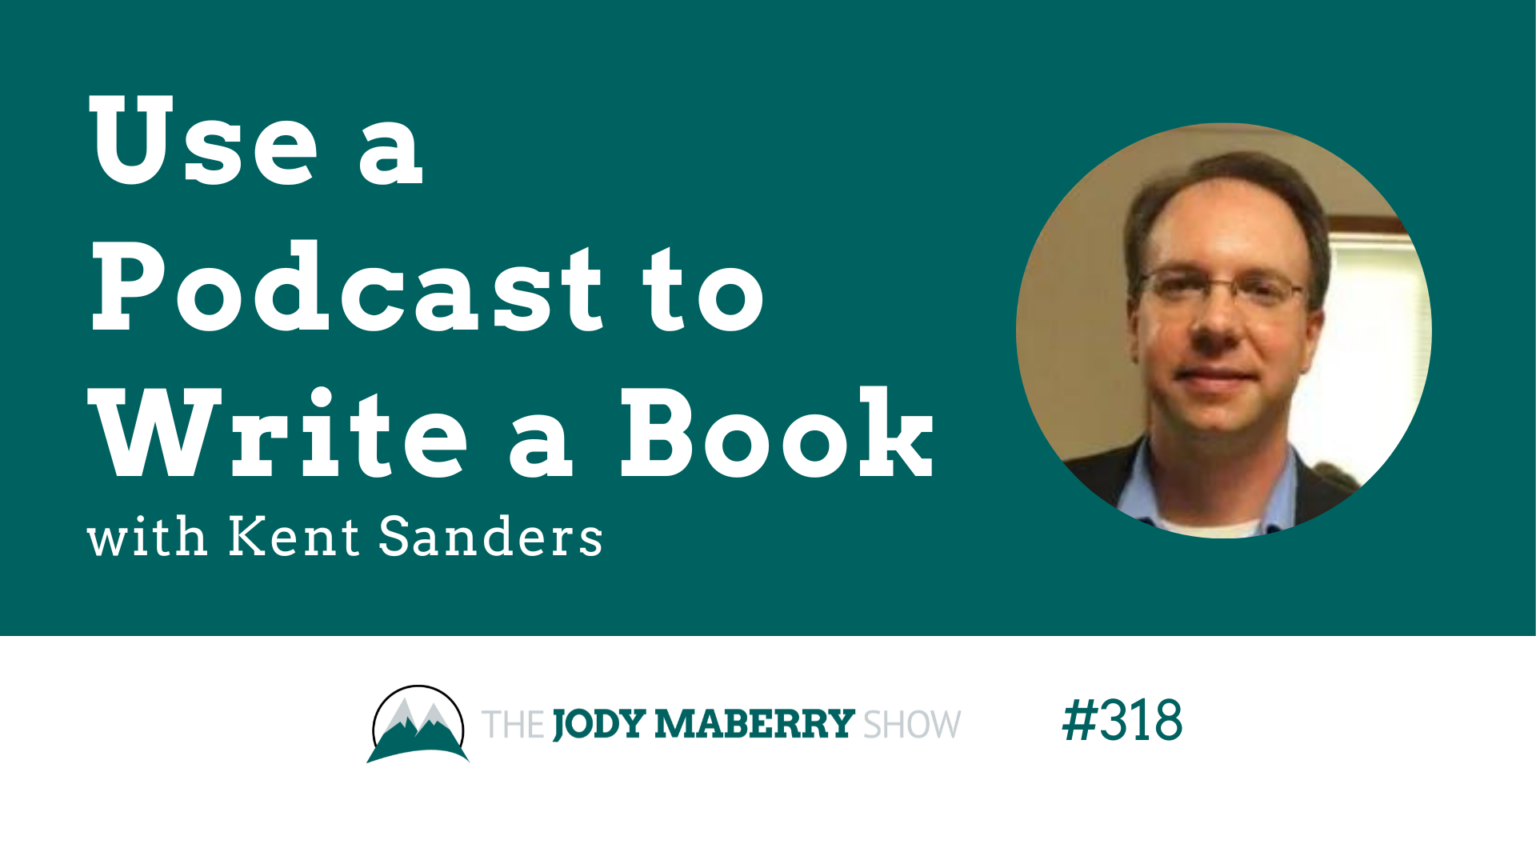 Jody Maberry Show Episode 318 Use a podcast to write a book